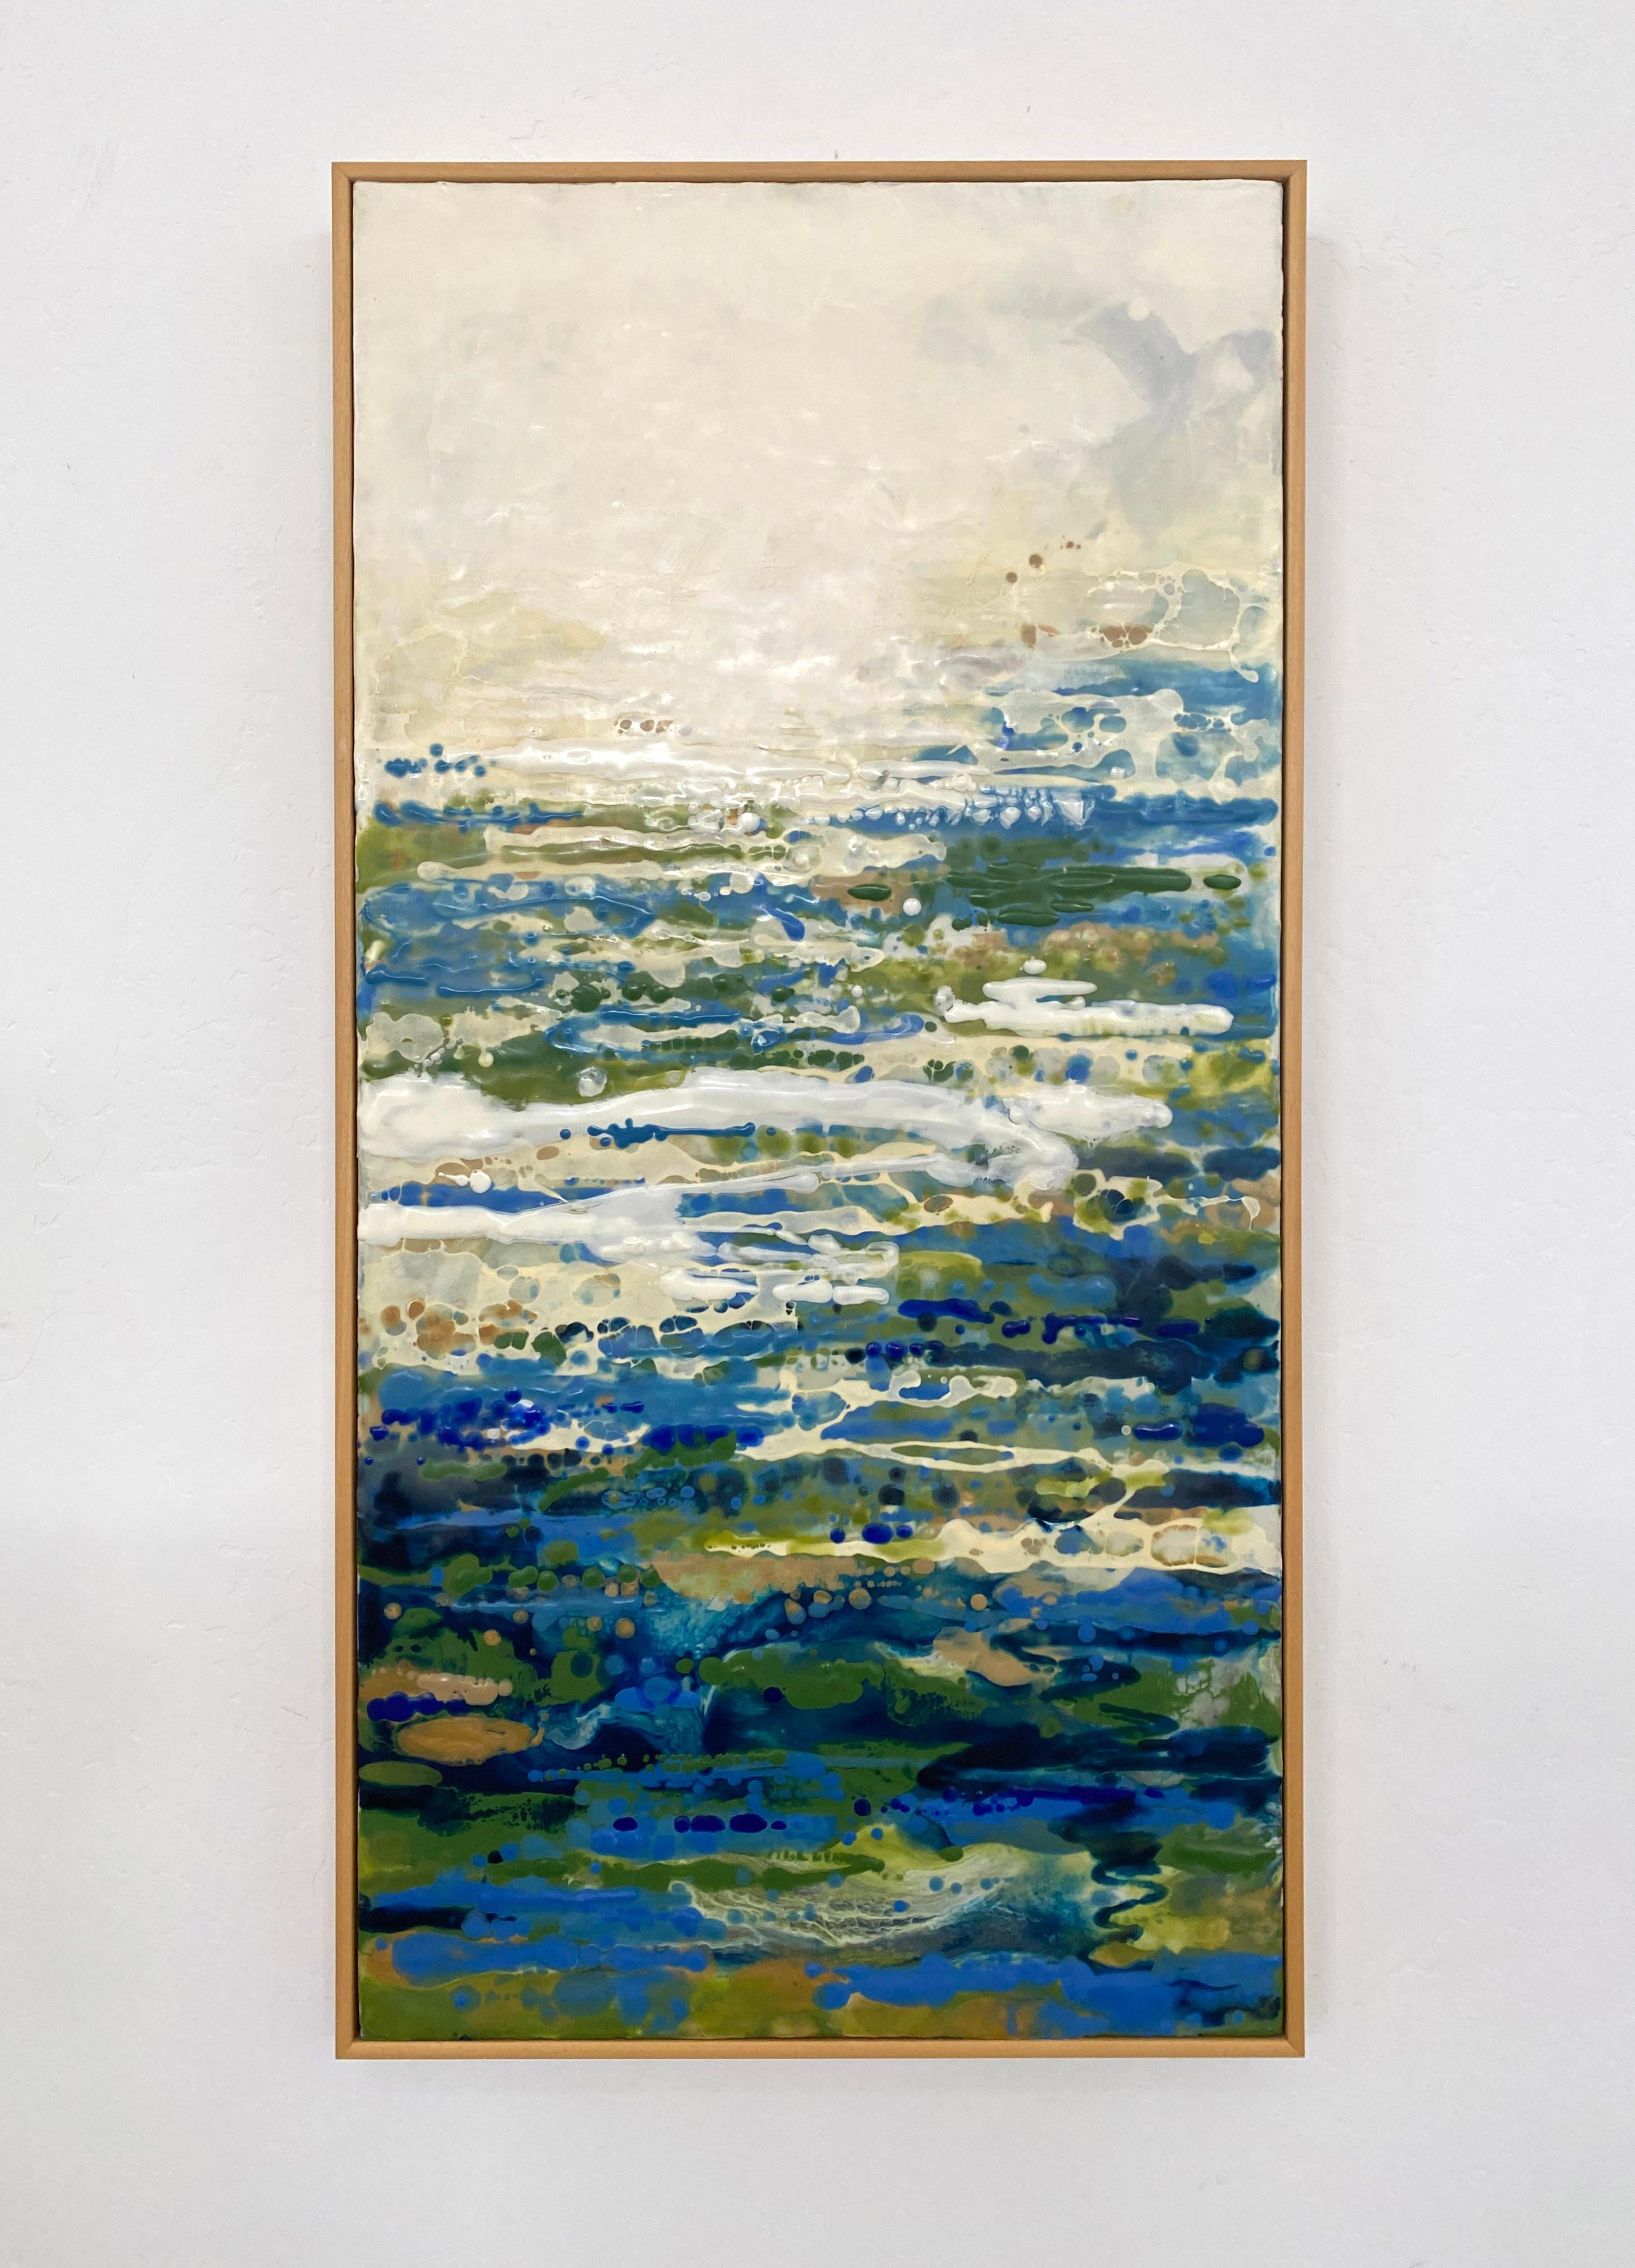 Tania Dibbs Landscape Painting - Scintillo, encaustic blue and green abstract painting in wood frame